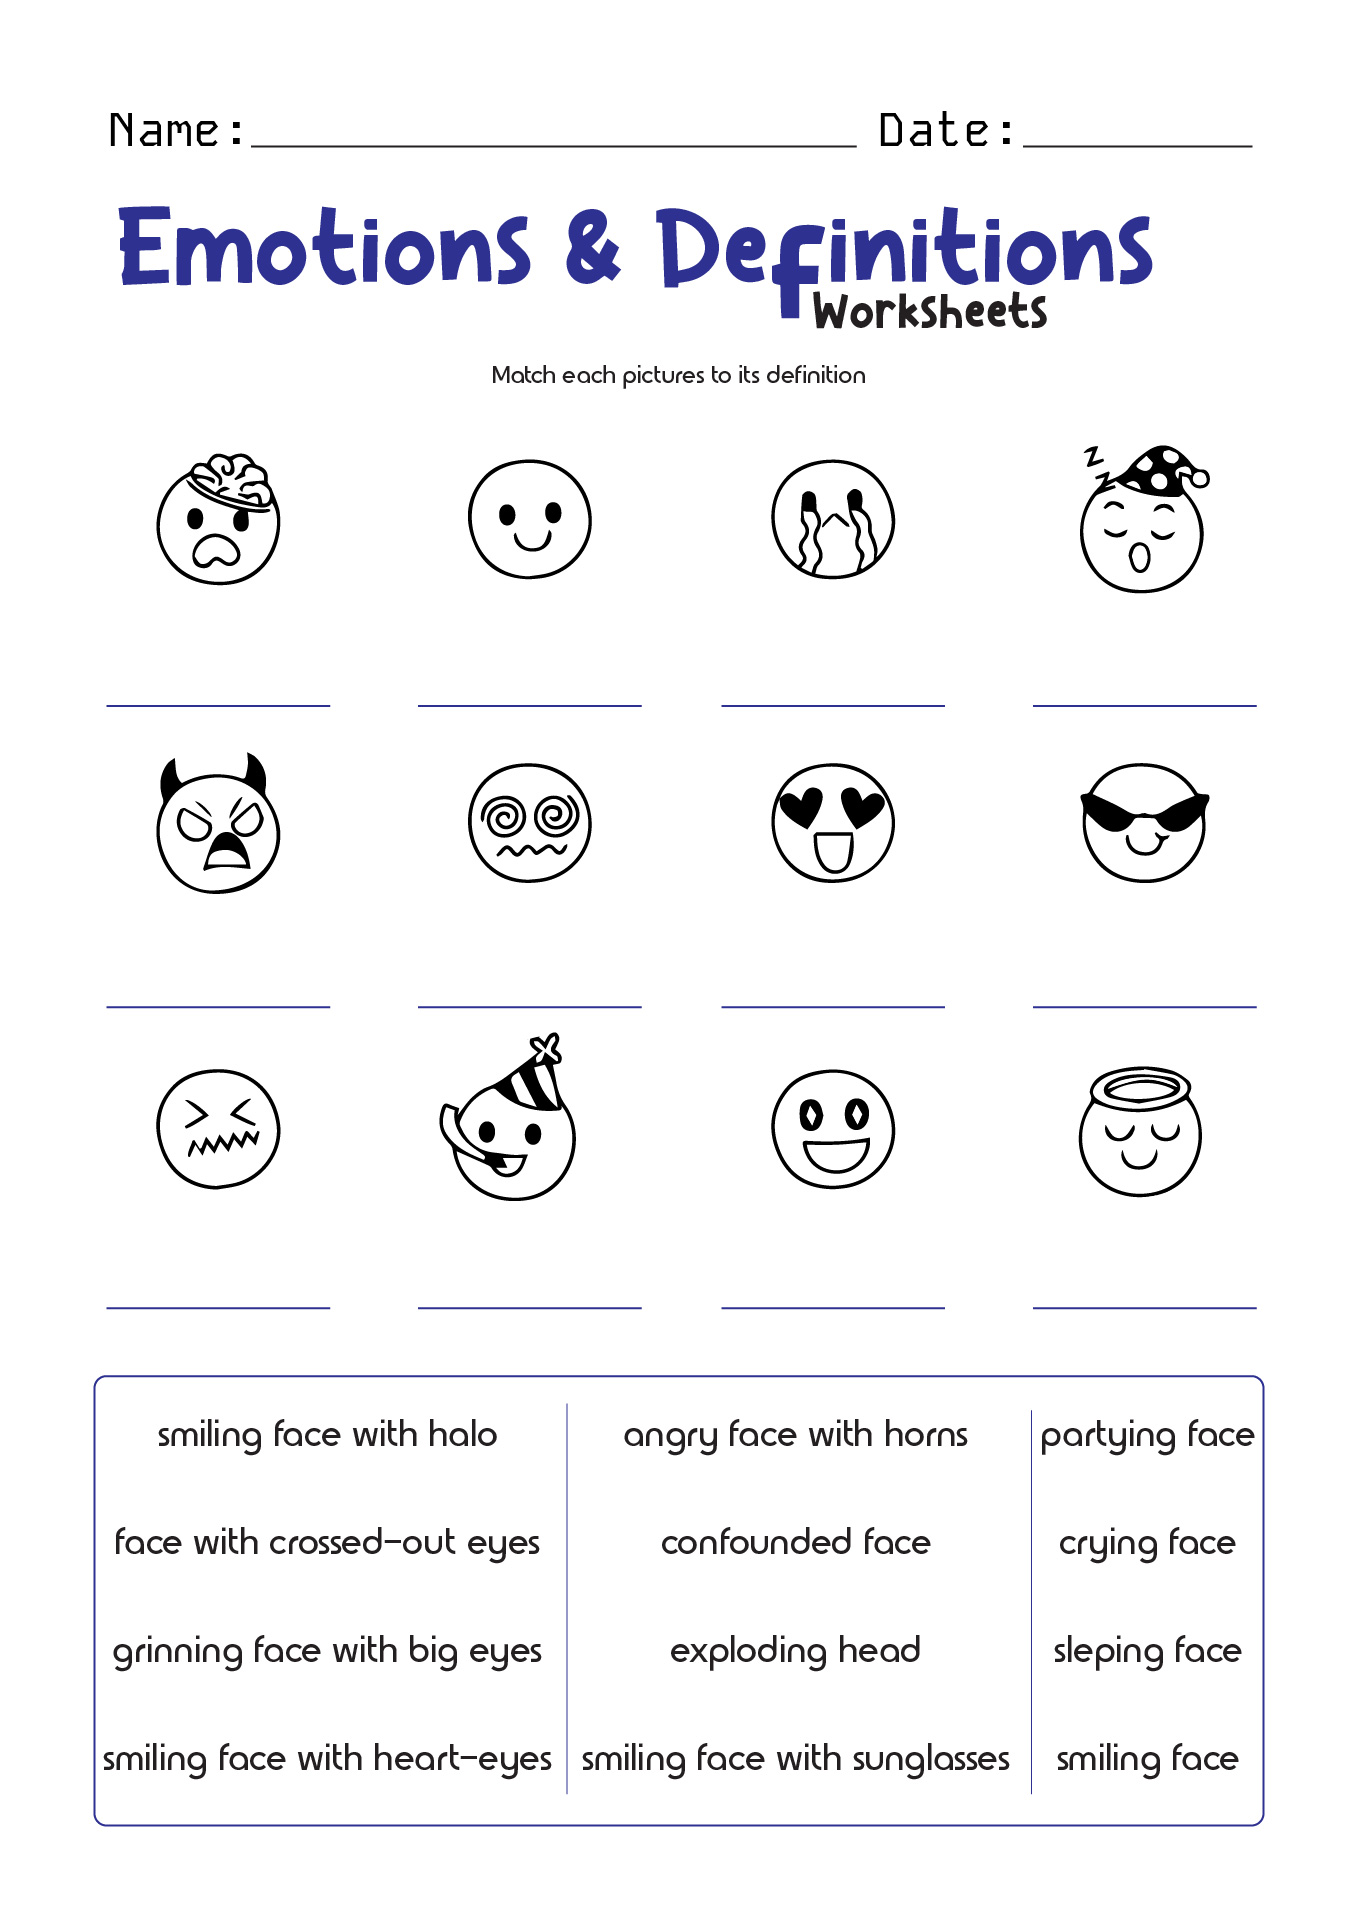 Emotions and Definitions Worksheet